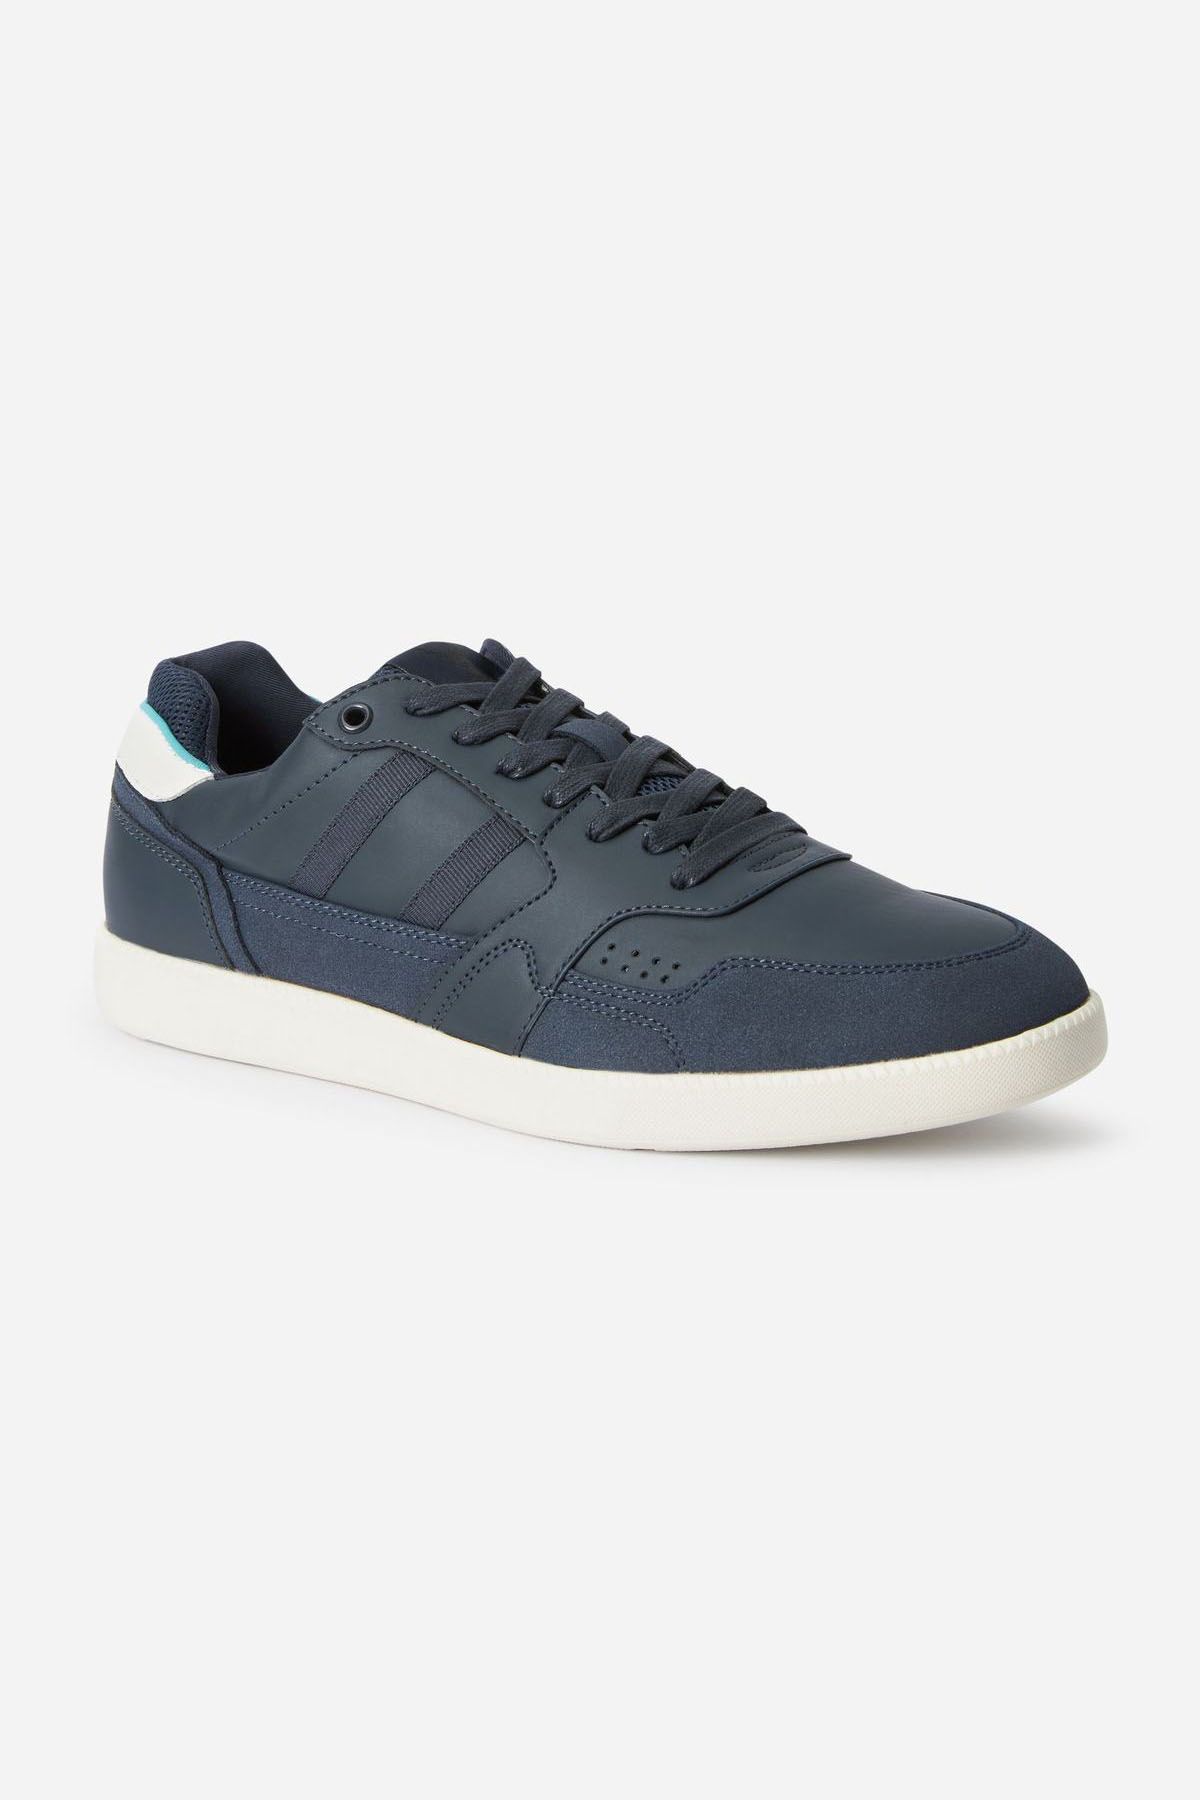 NEXT Trainers Blue Men Sneakers